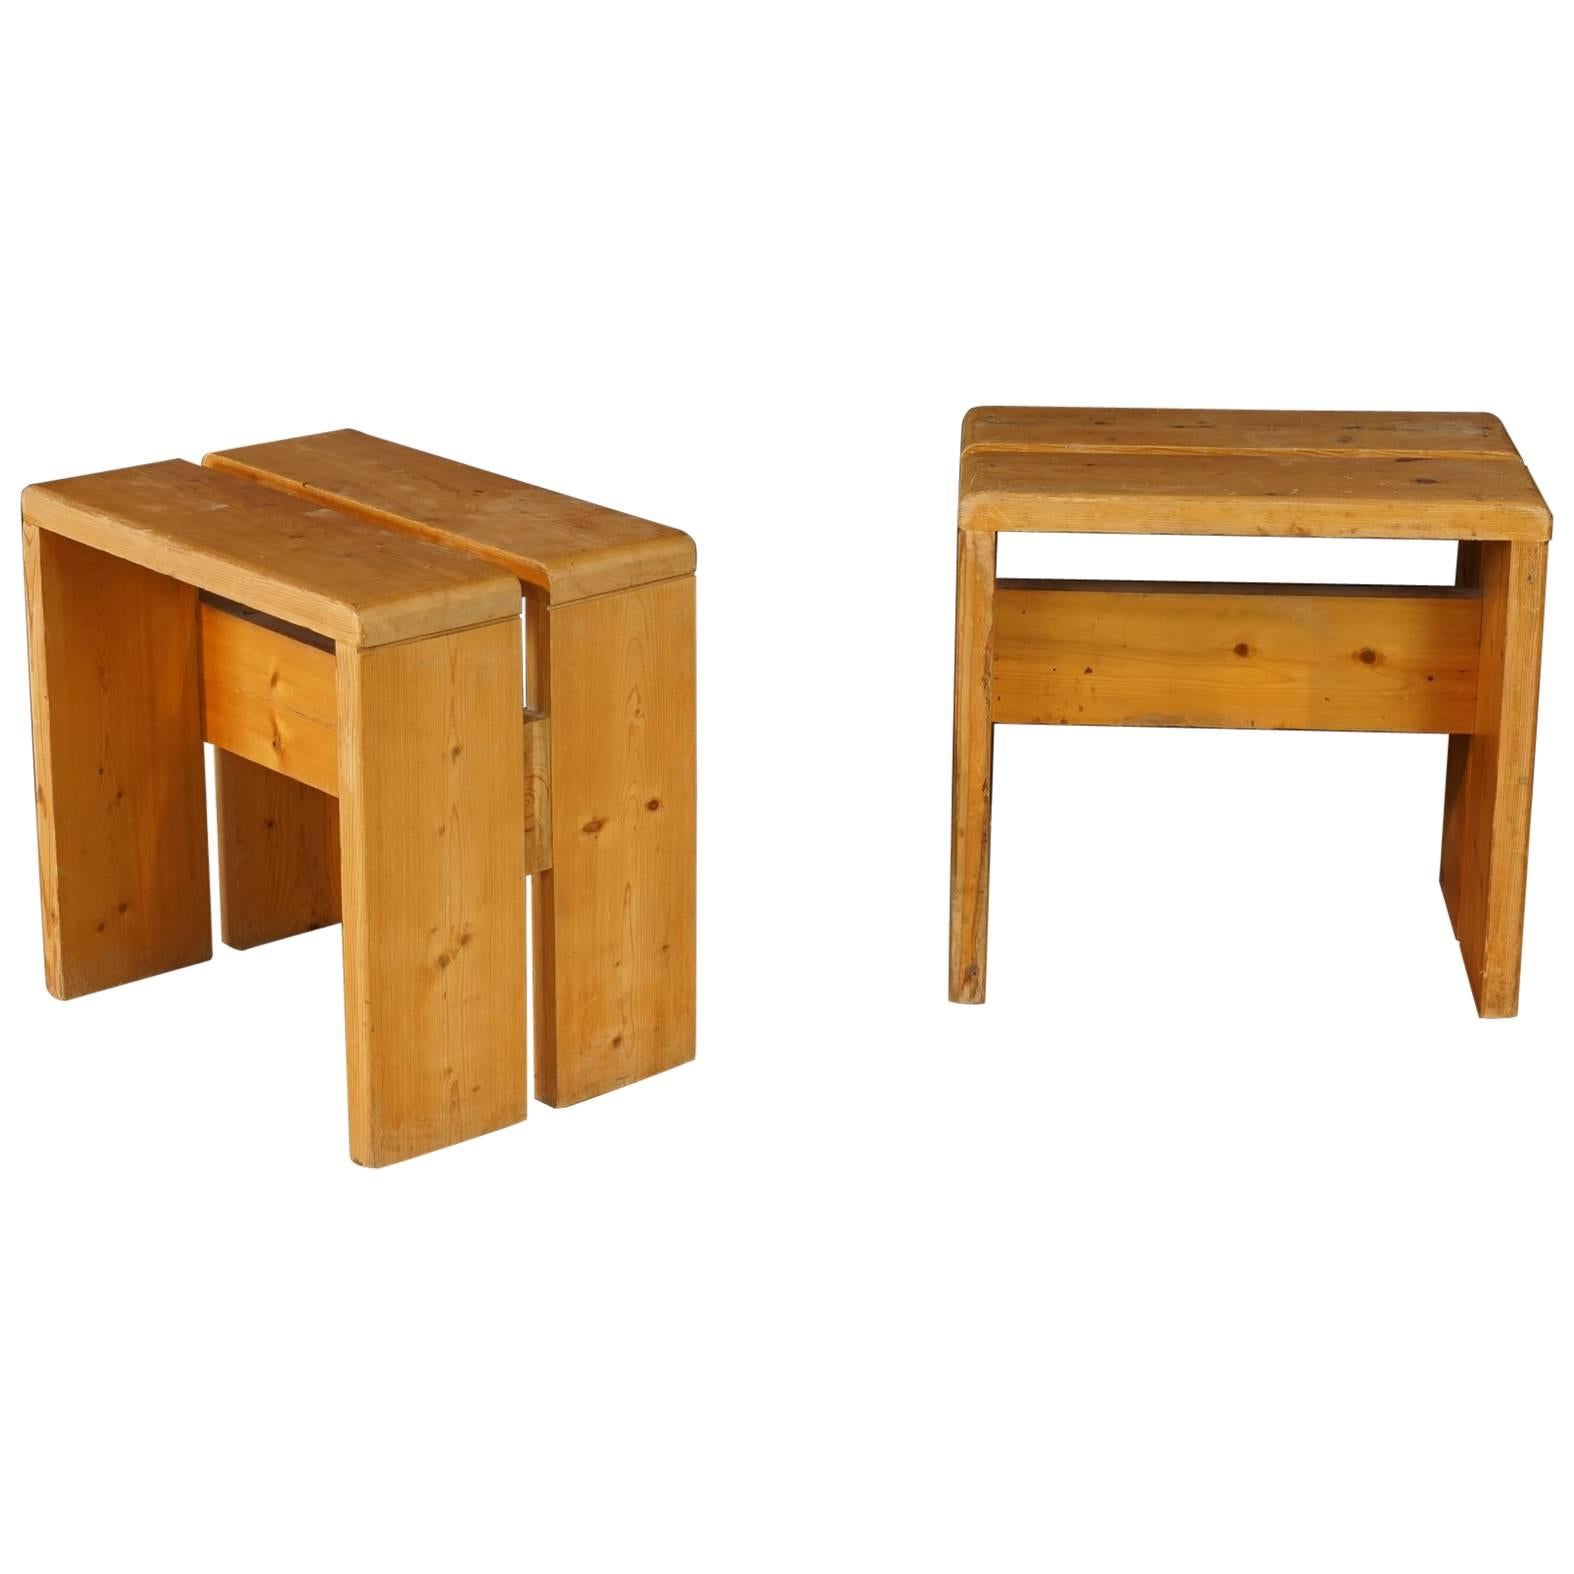 Set of rare stools designed by Charlotte Perriand for Les Arcs ski resort in France, circa 1960. Set comprises of two pairs in two very similar models.